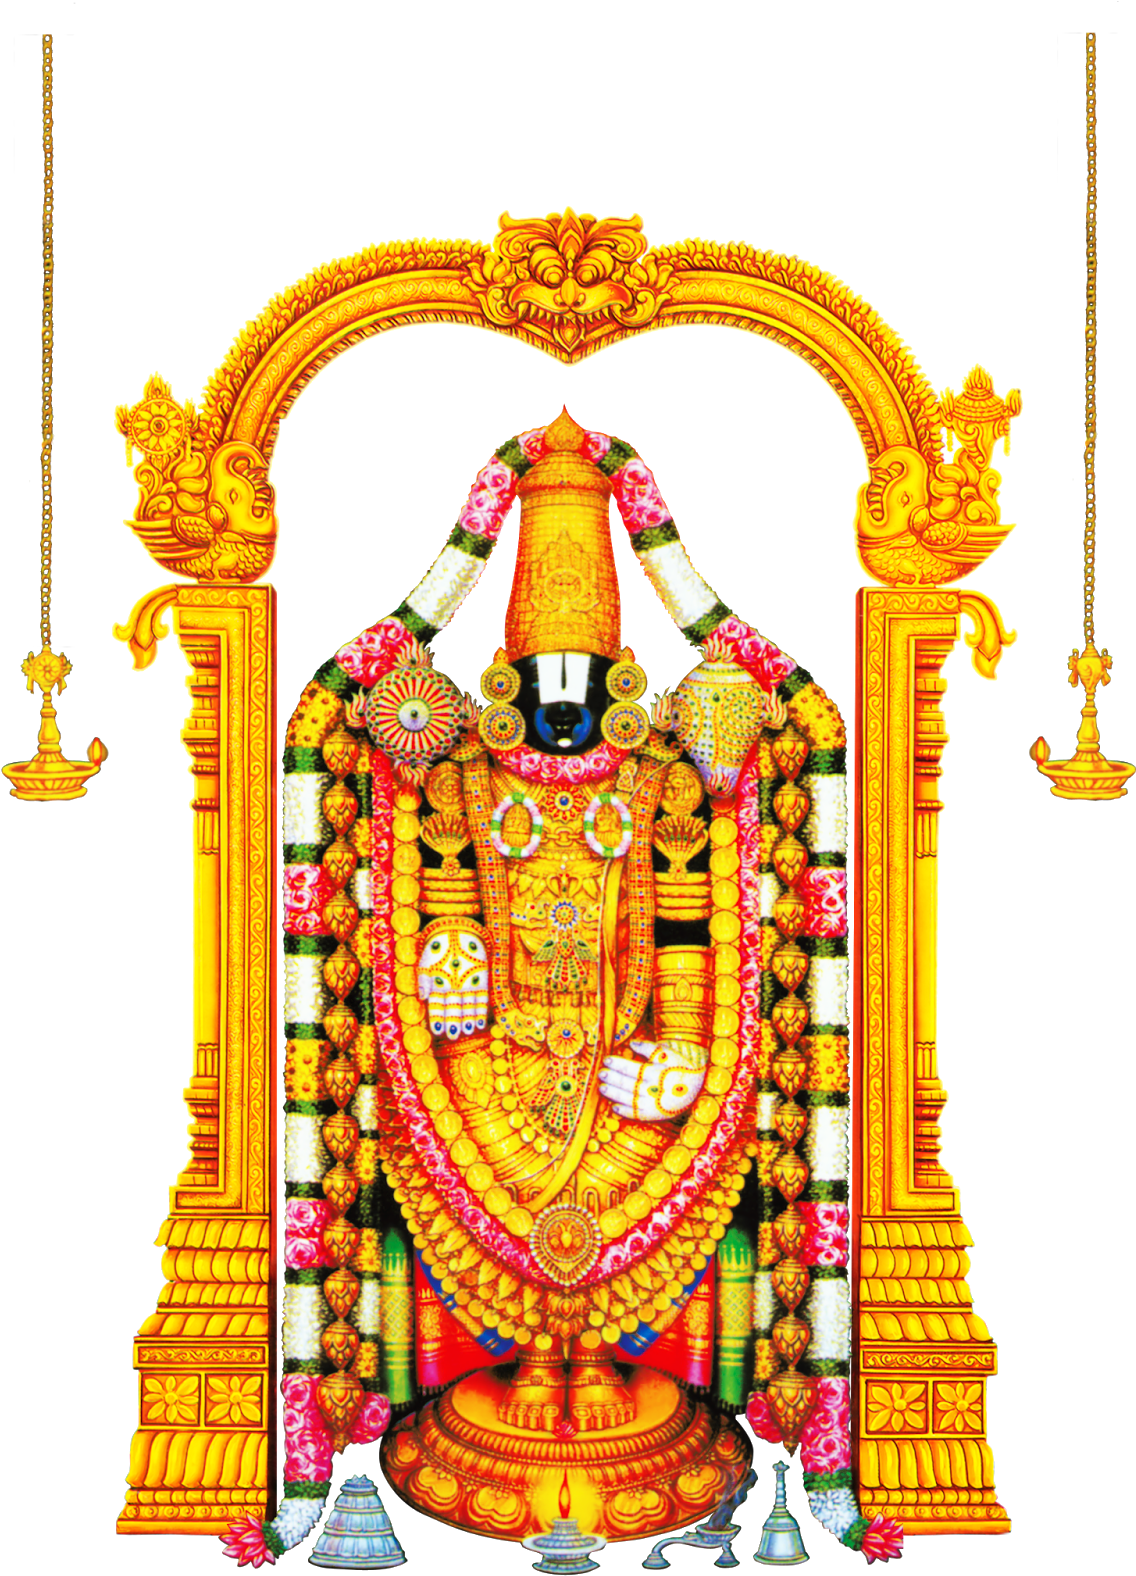 A Painting Of A Man In A Gold Frame With Venkateswara Temple, Tirumala In The Background